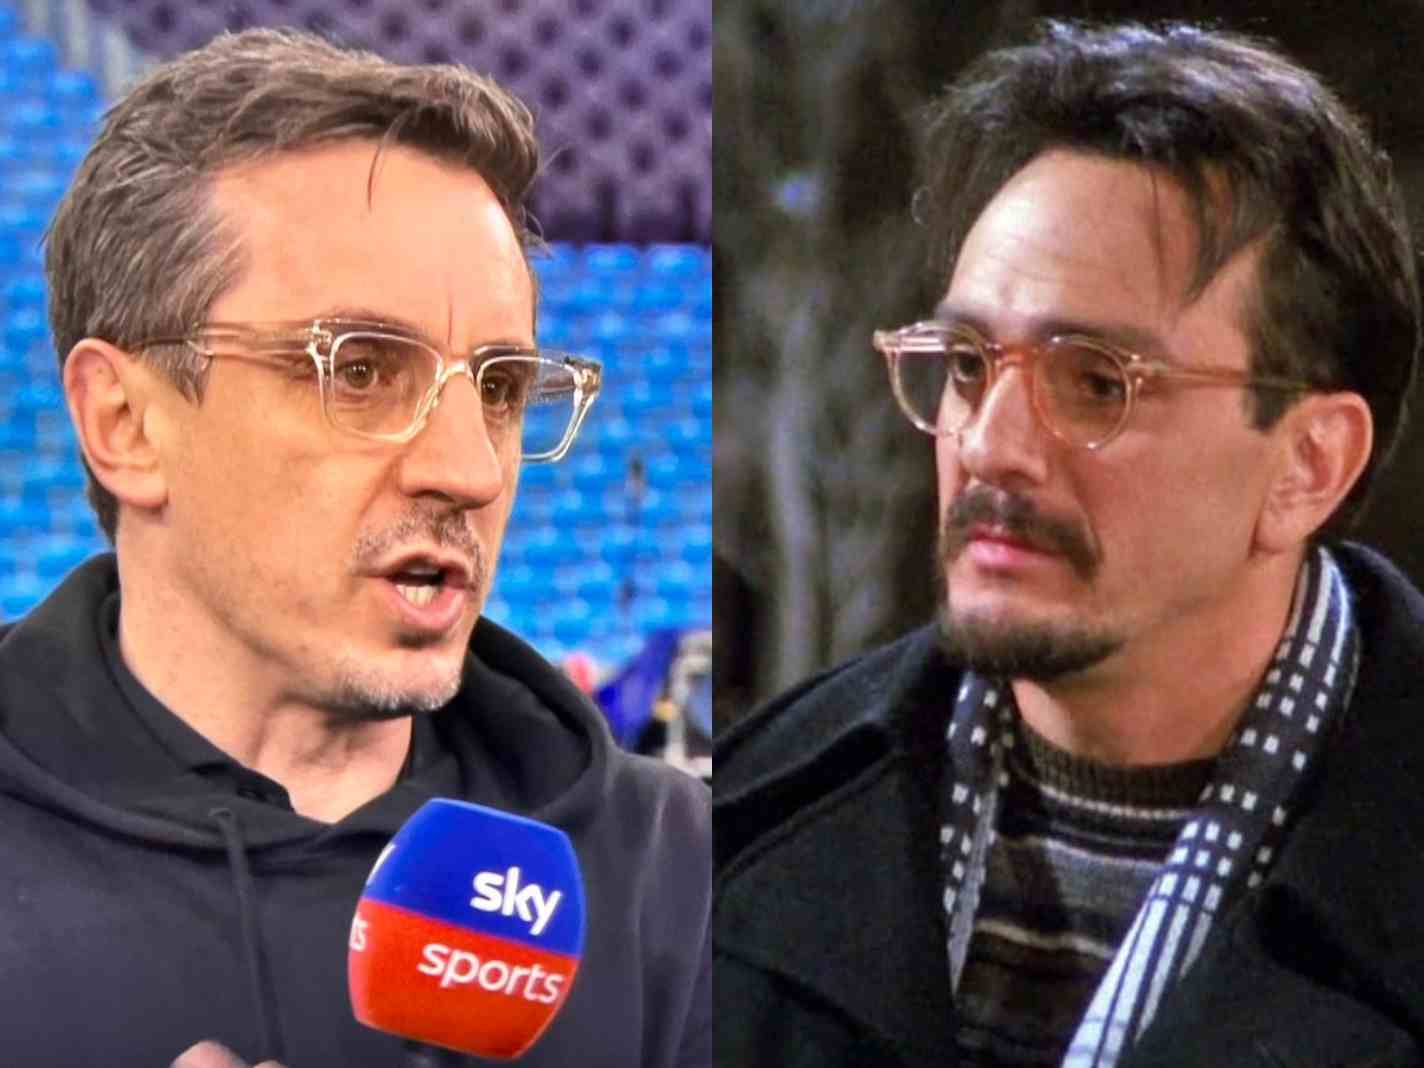 The Friends character Gary Neville shares an uncanny resemblance with